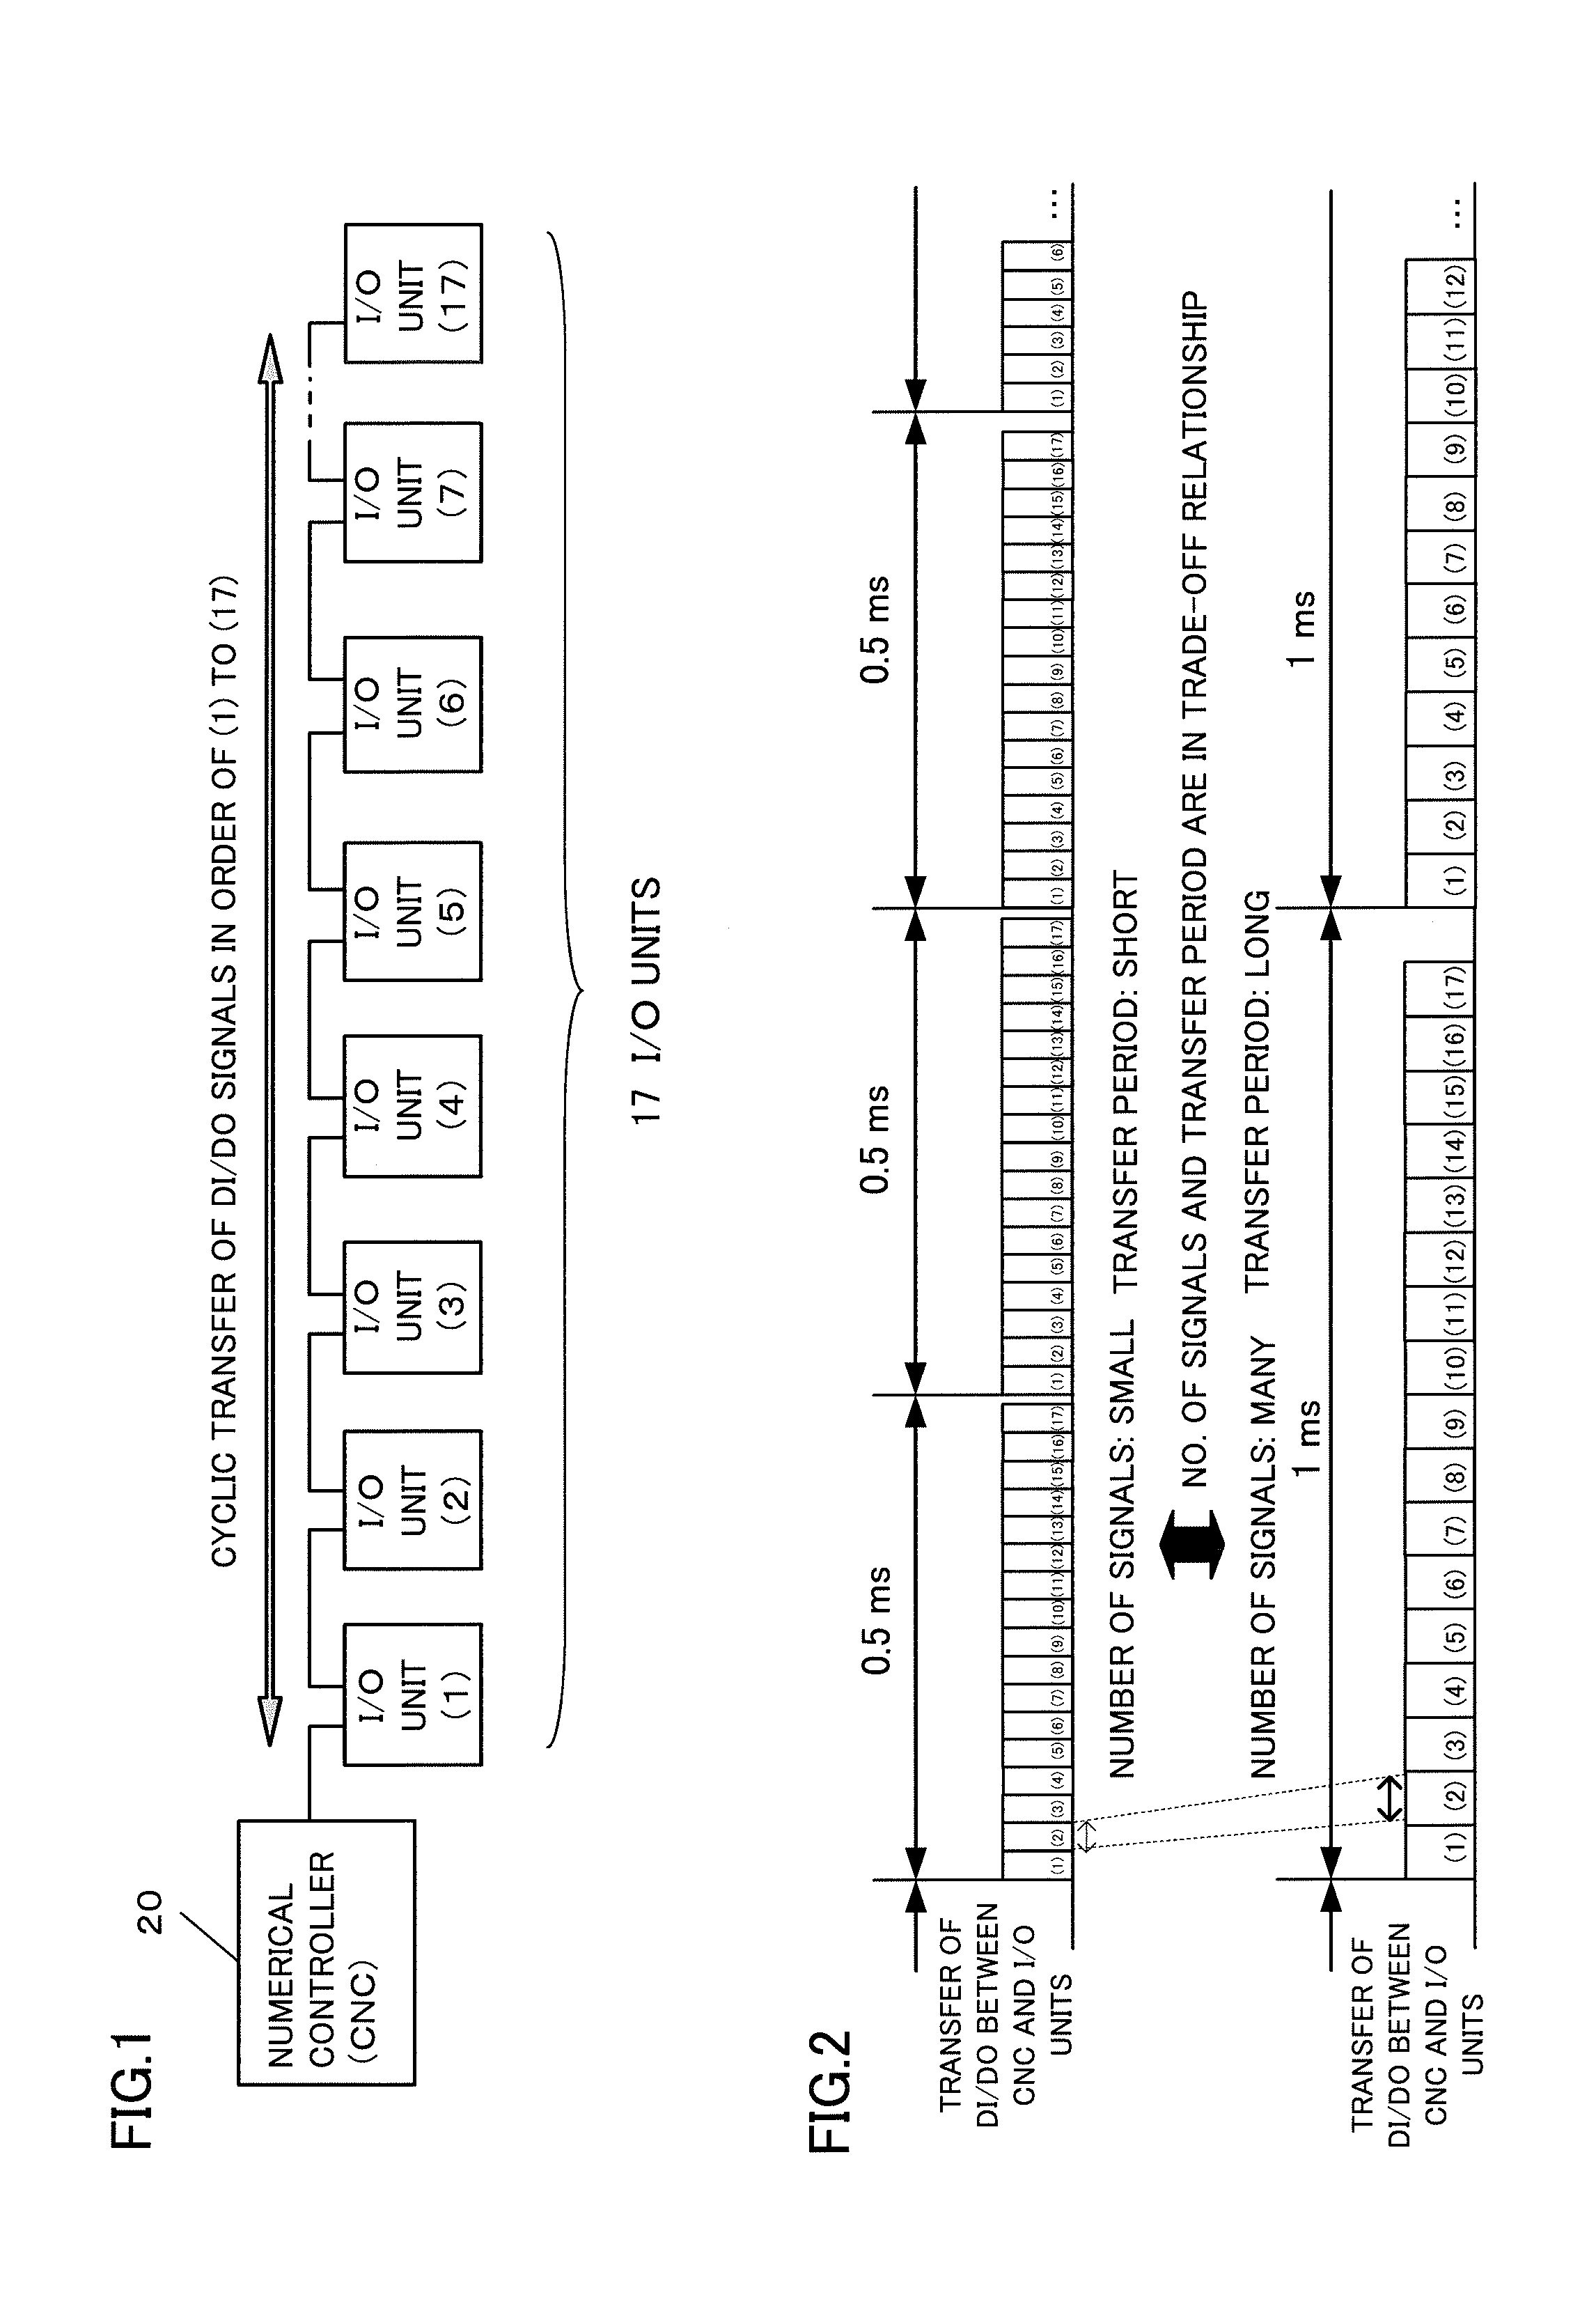 Numerical controller for communication with I/O units